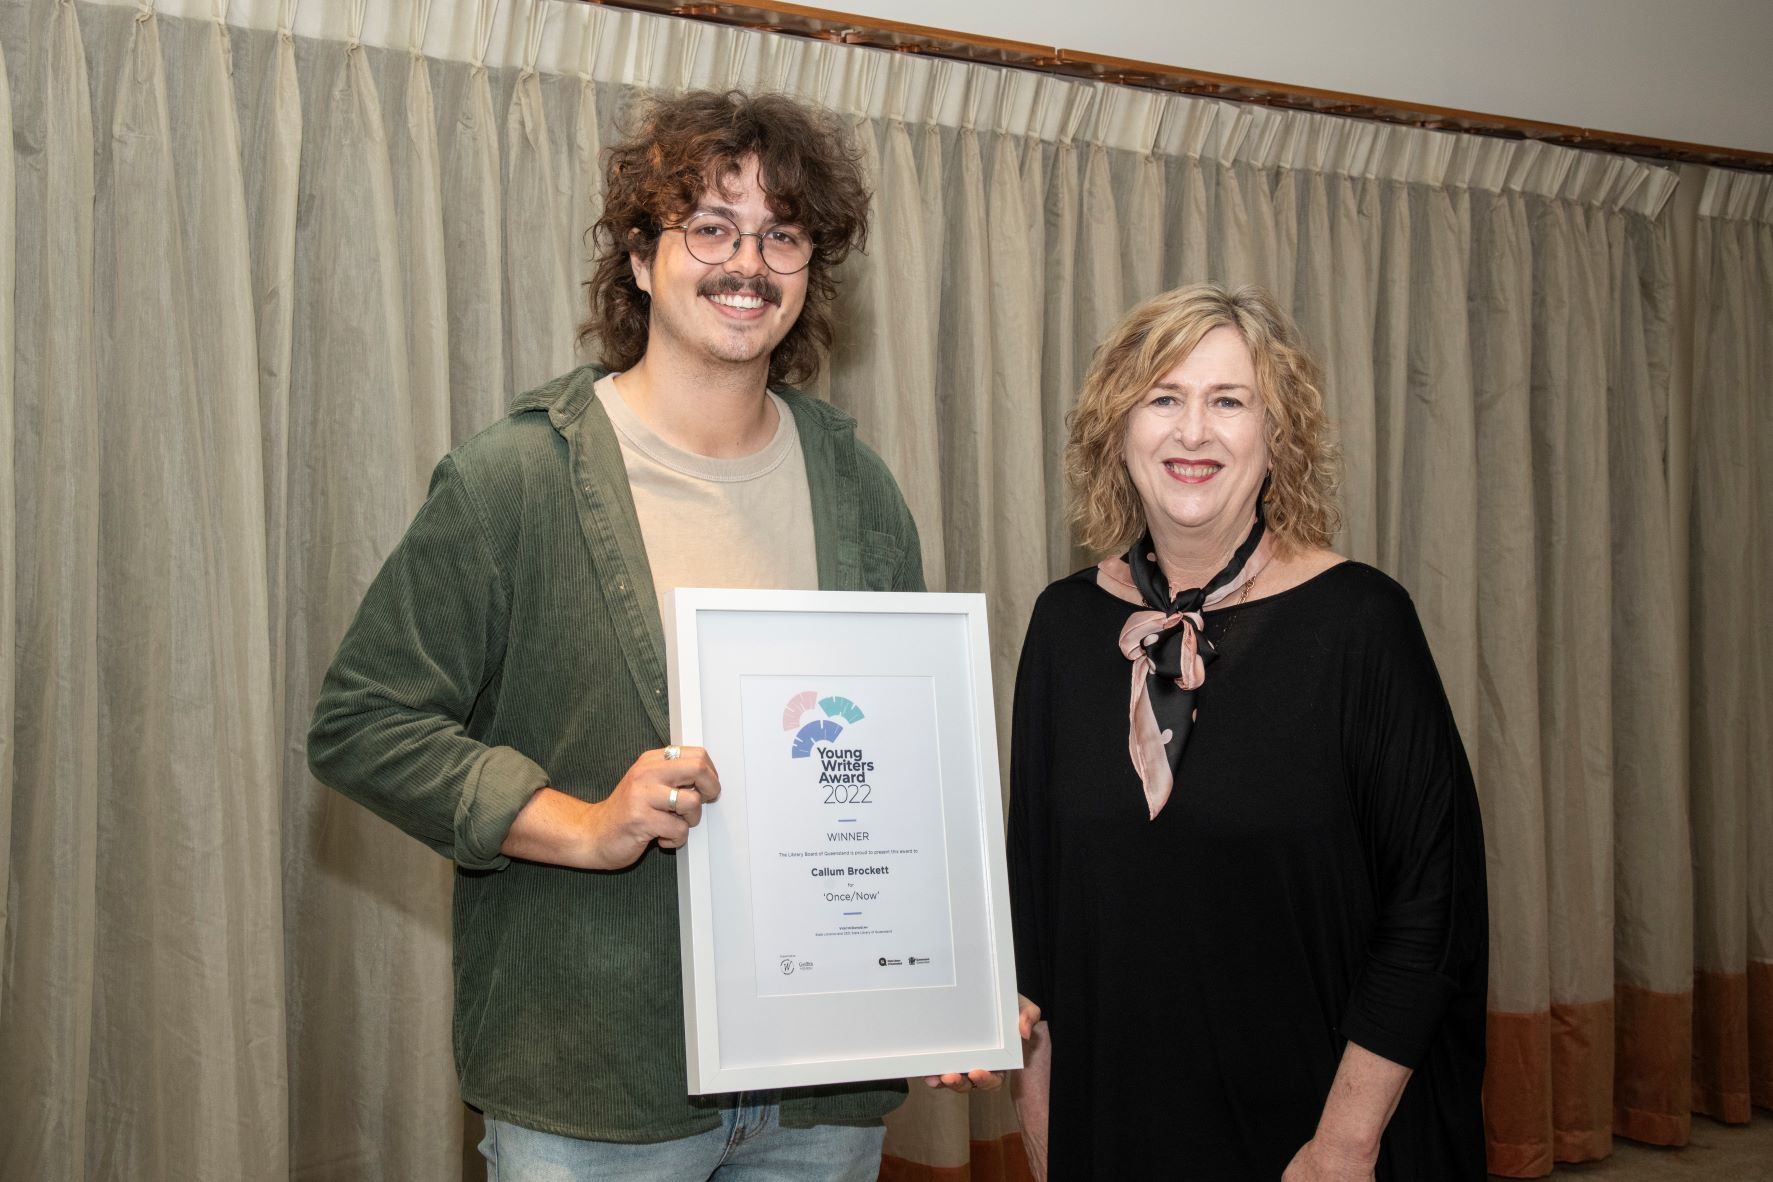 Two people standing next to each other smiling, one is holding a certificate